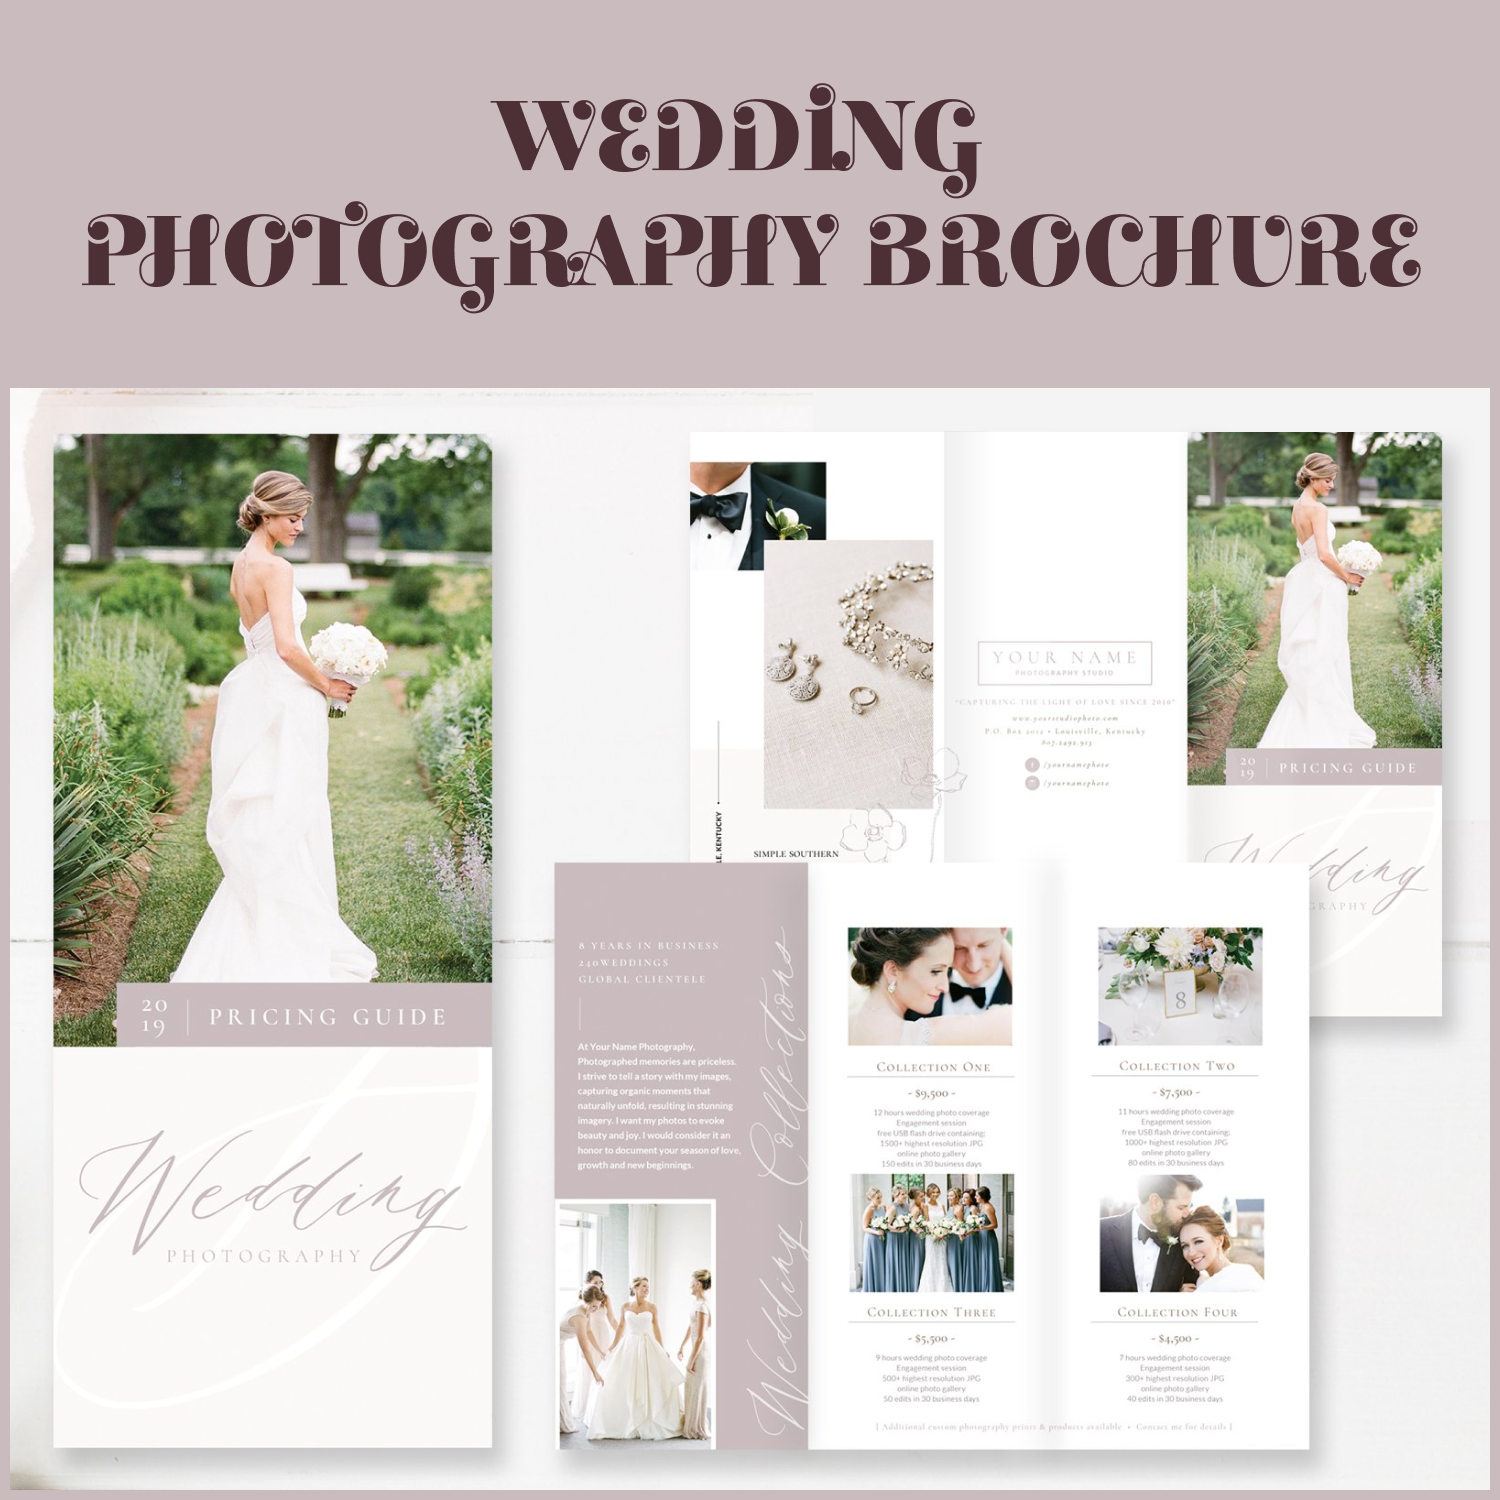 Preview wedding photography brochure.